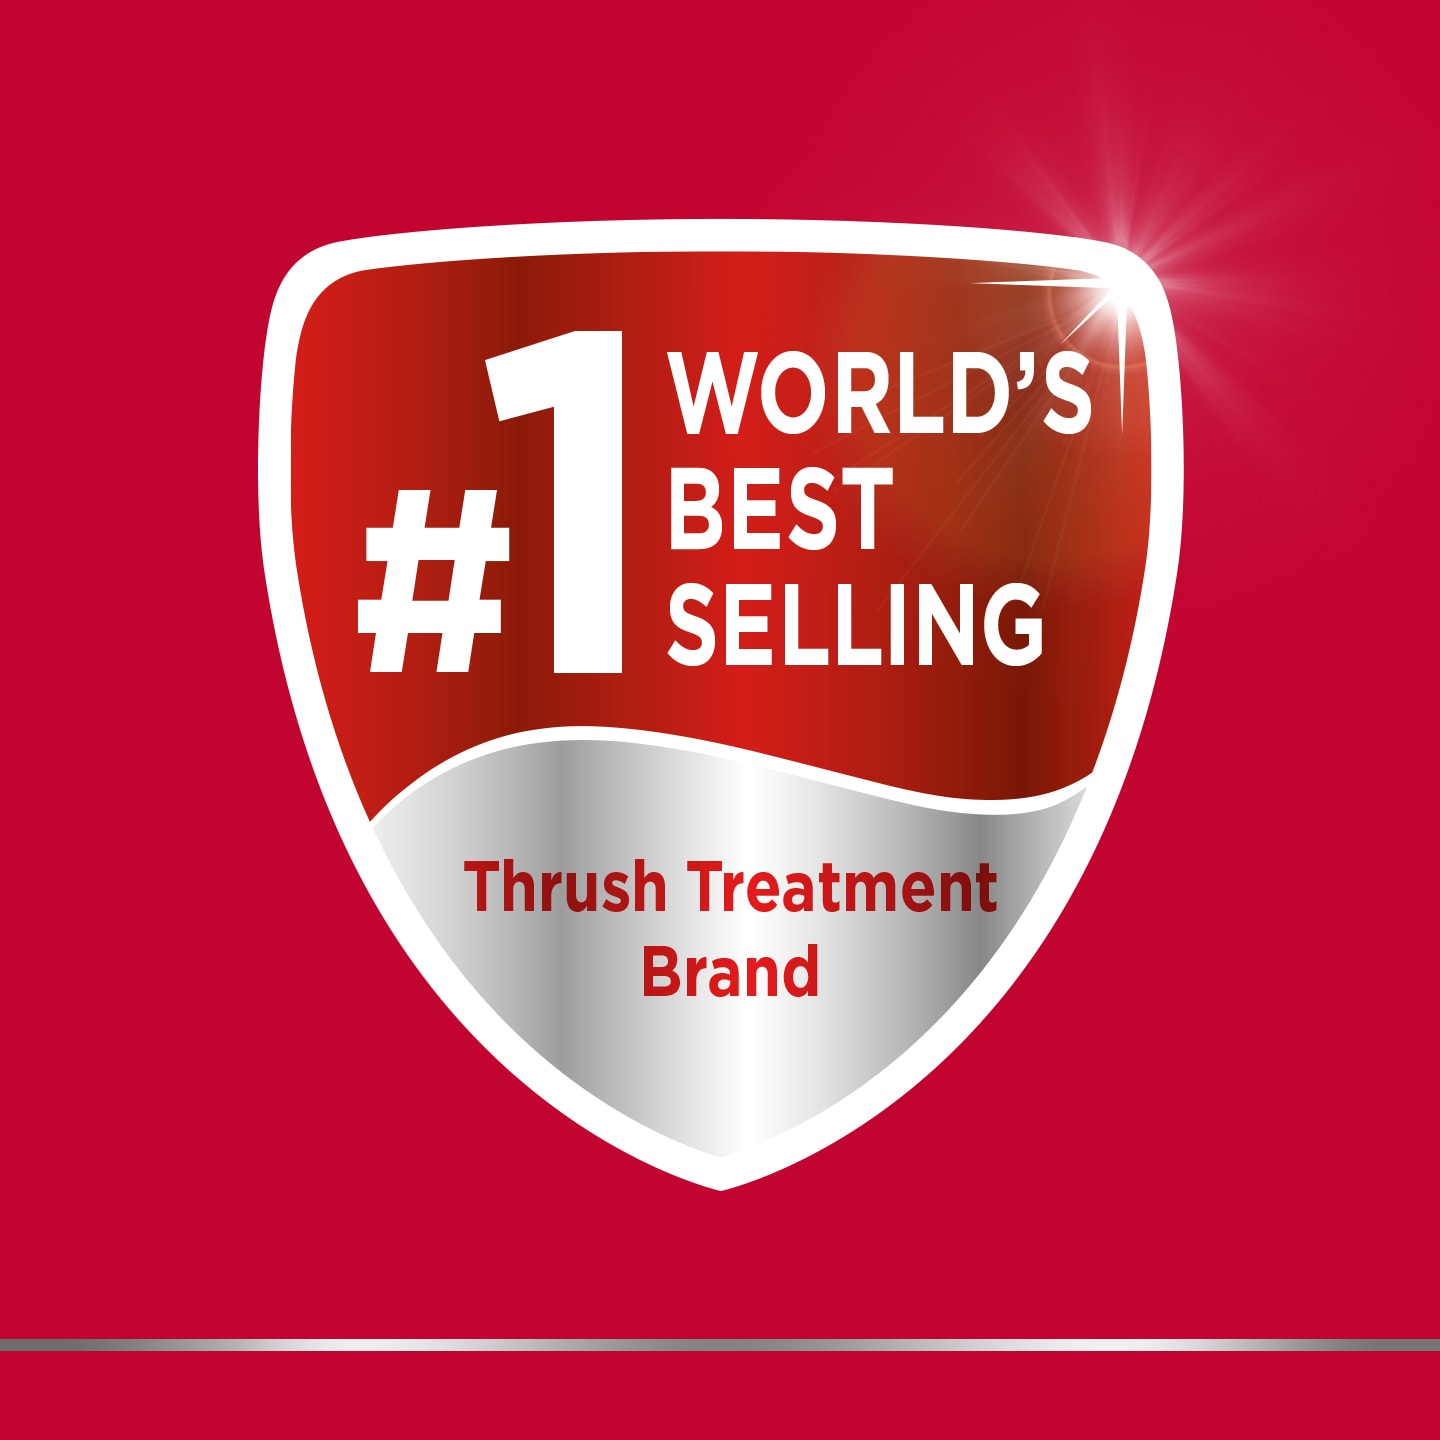 Canesten badge: #1 World’s best selling Thrush Treatment Brand and caption below: Trusted by millions of women for over 40 years